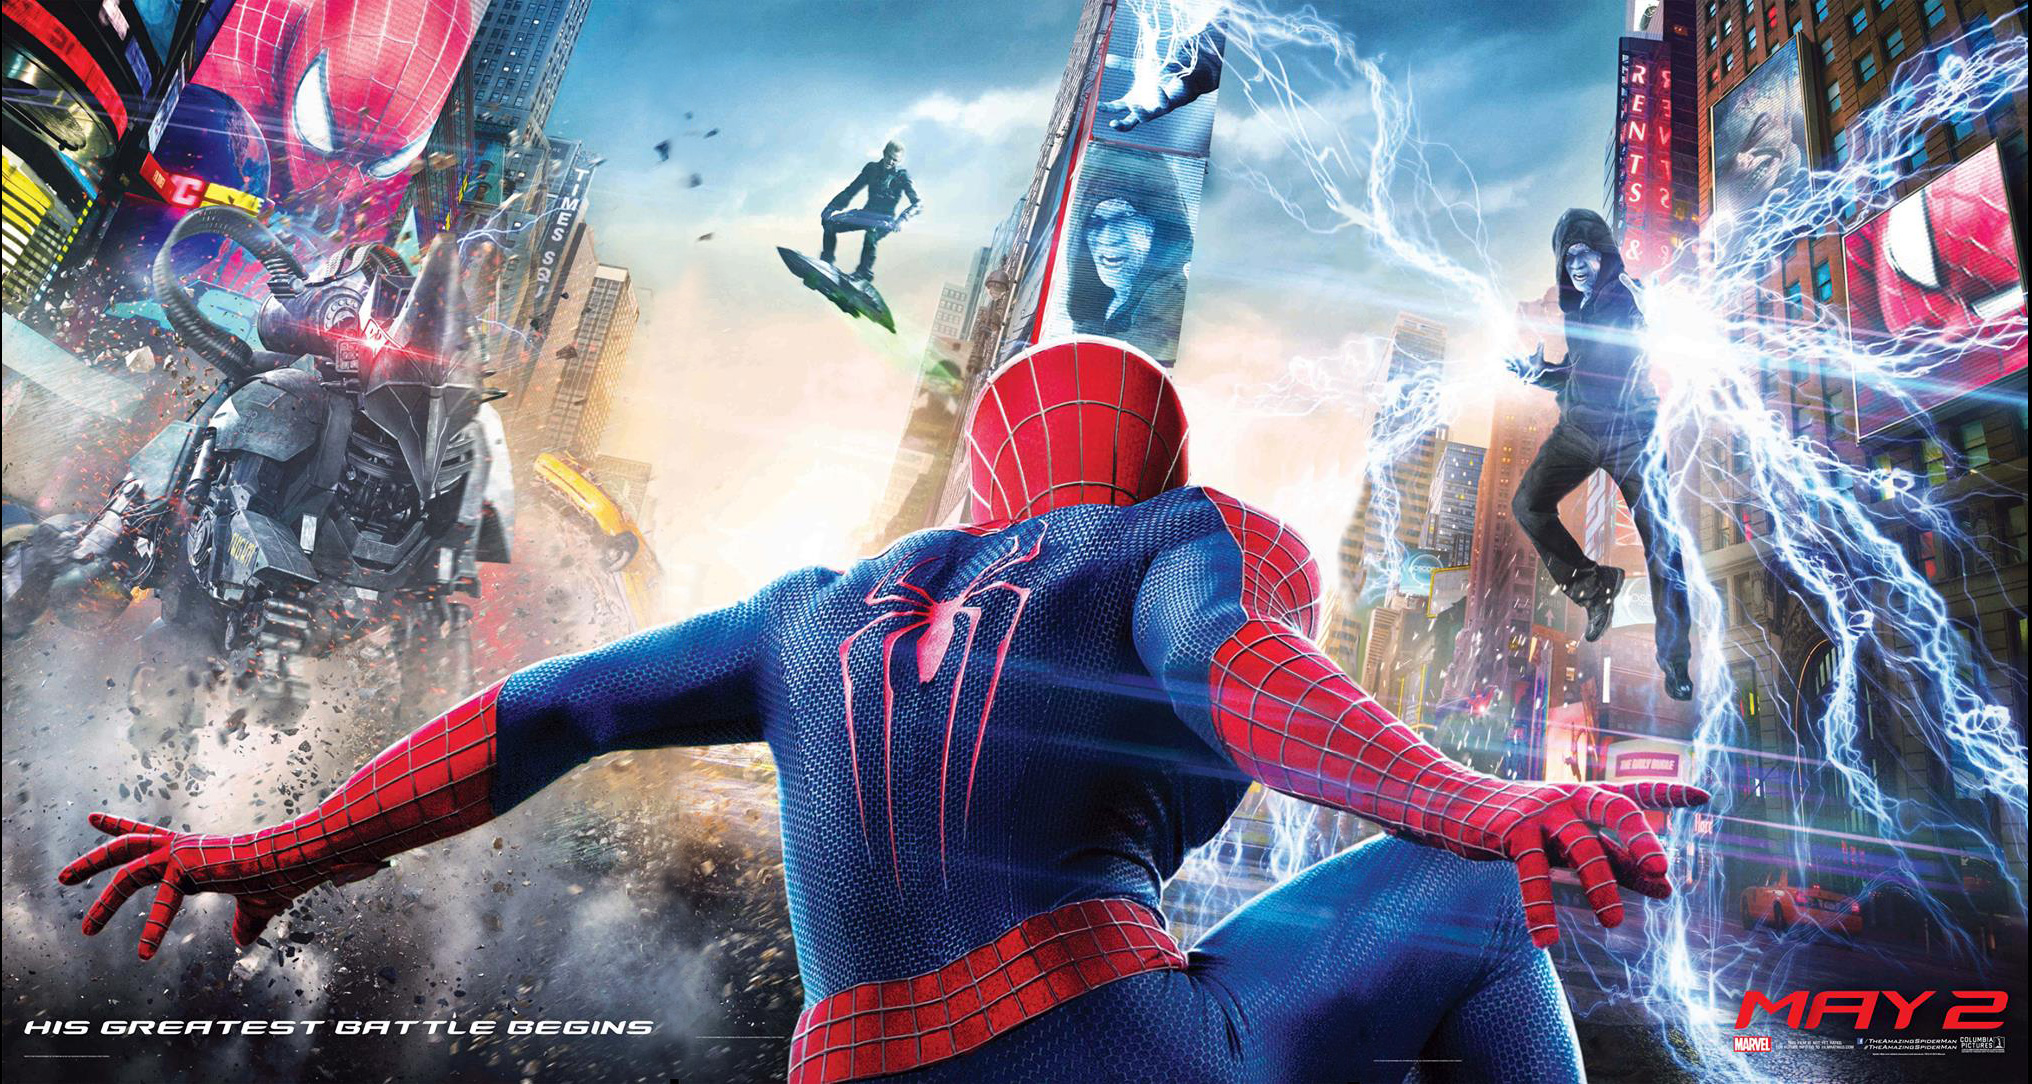 http://vignette1.wikia.nocookie.net/amazingspiderman/images/7/78/Amazing-spider-man-2-poster.jpg/revision/latest?cb=20140111075611